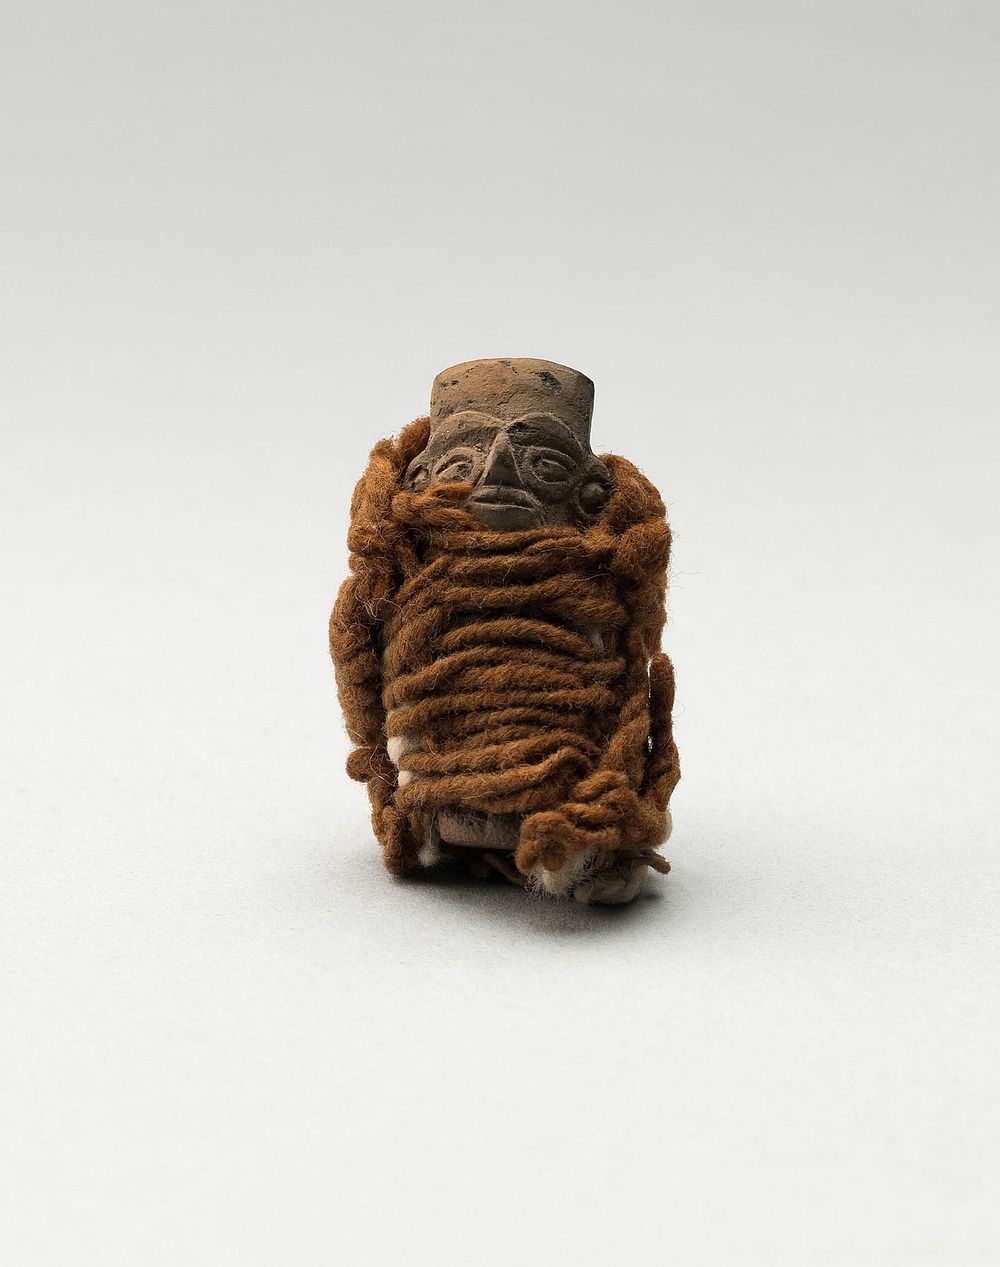 Mold-Made Figurine Wrapped in Wool String by Moche